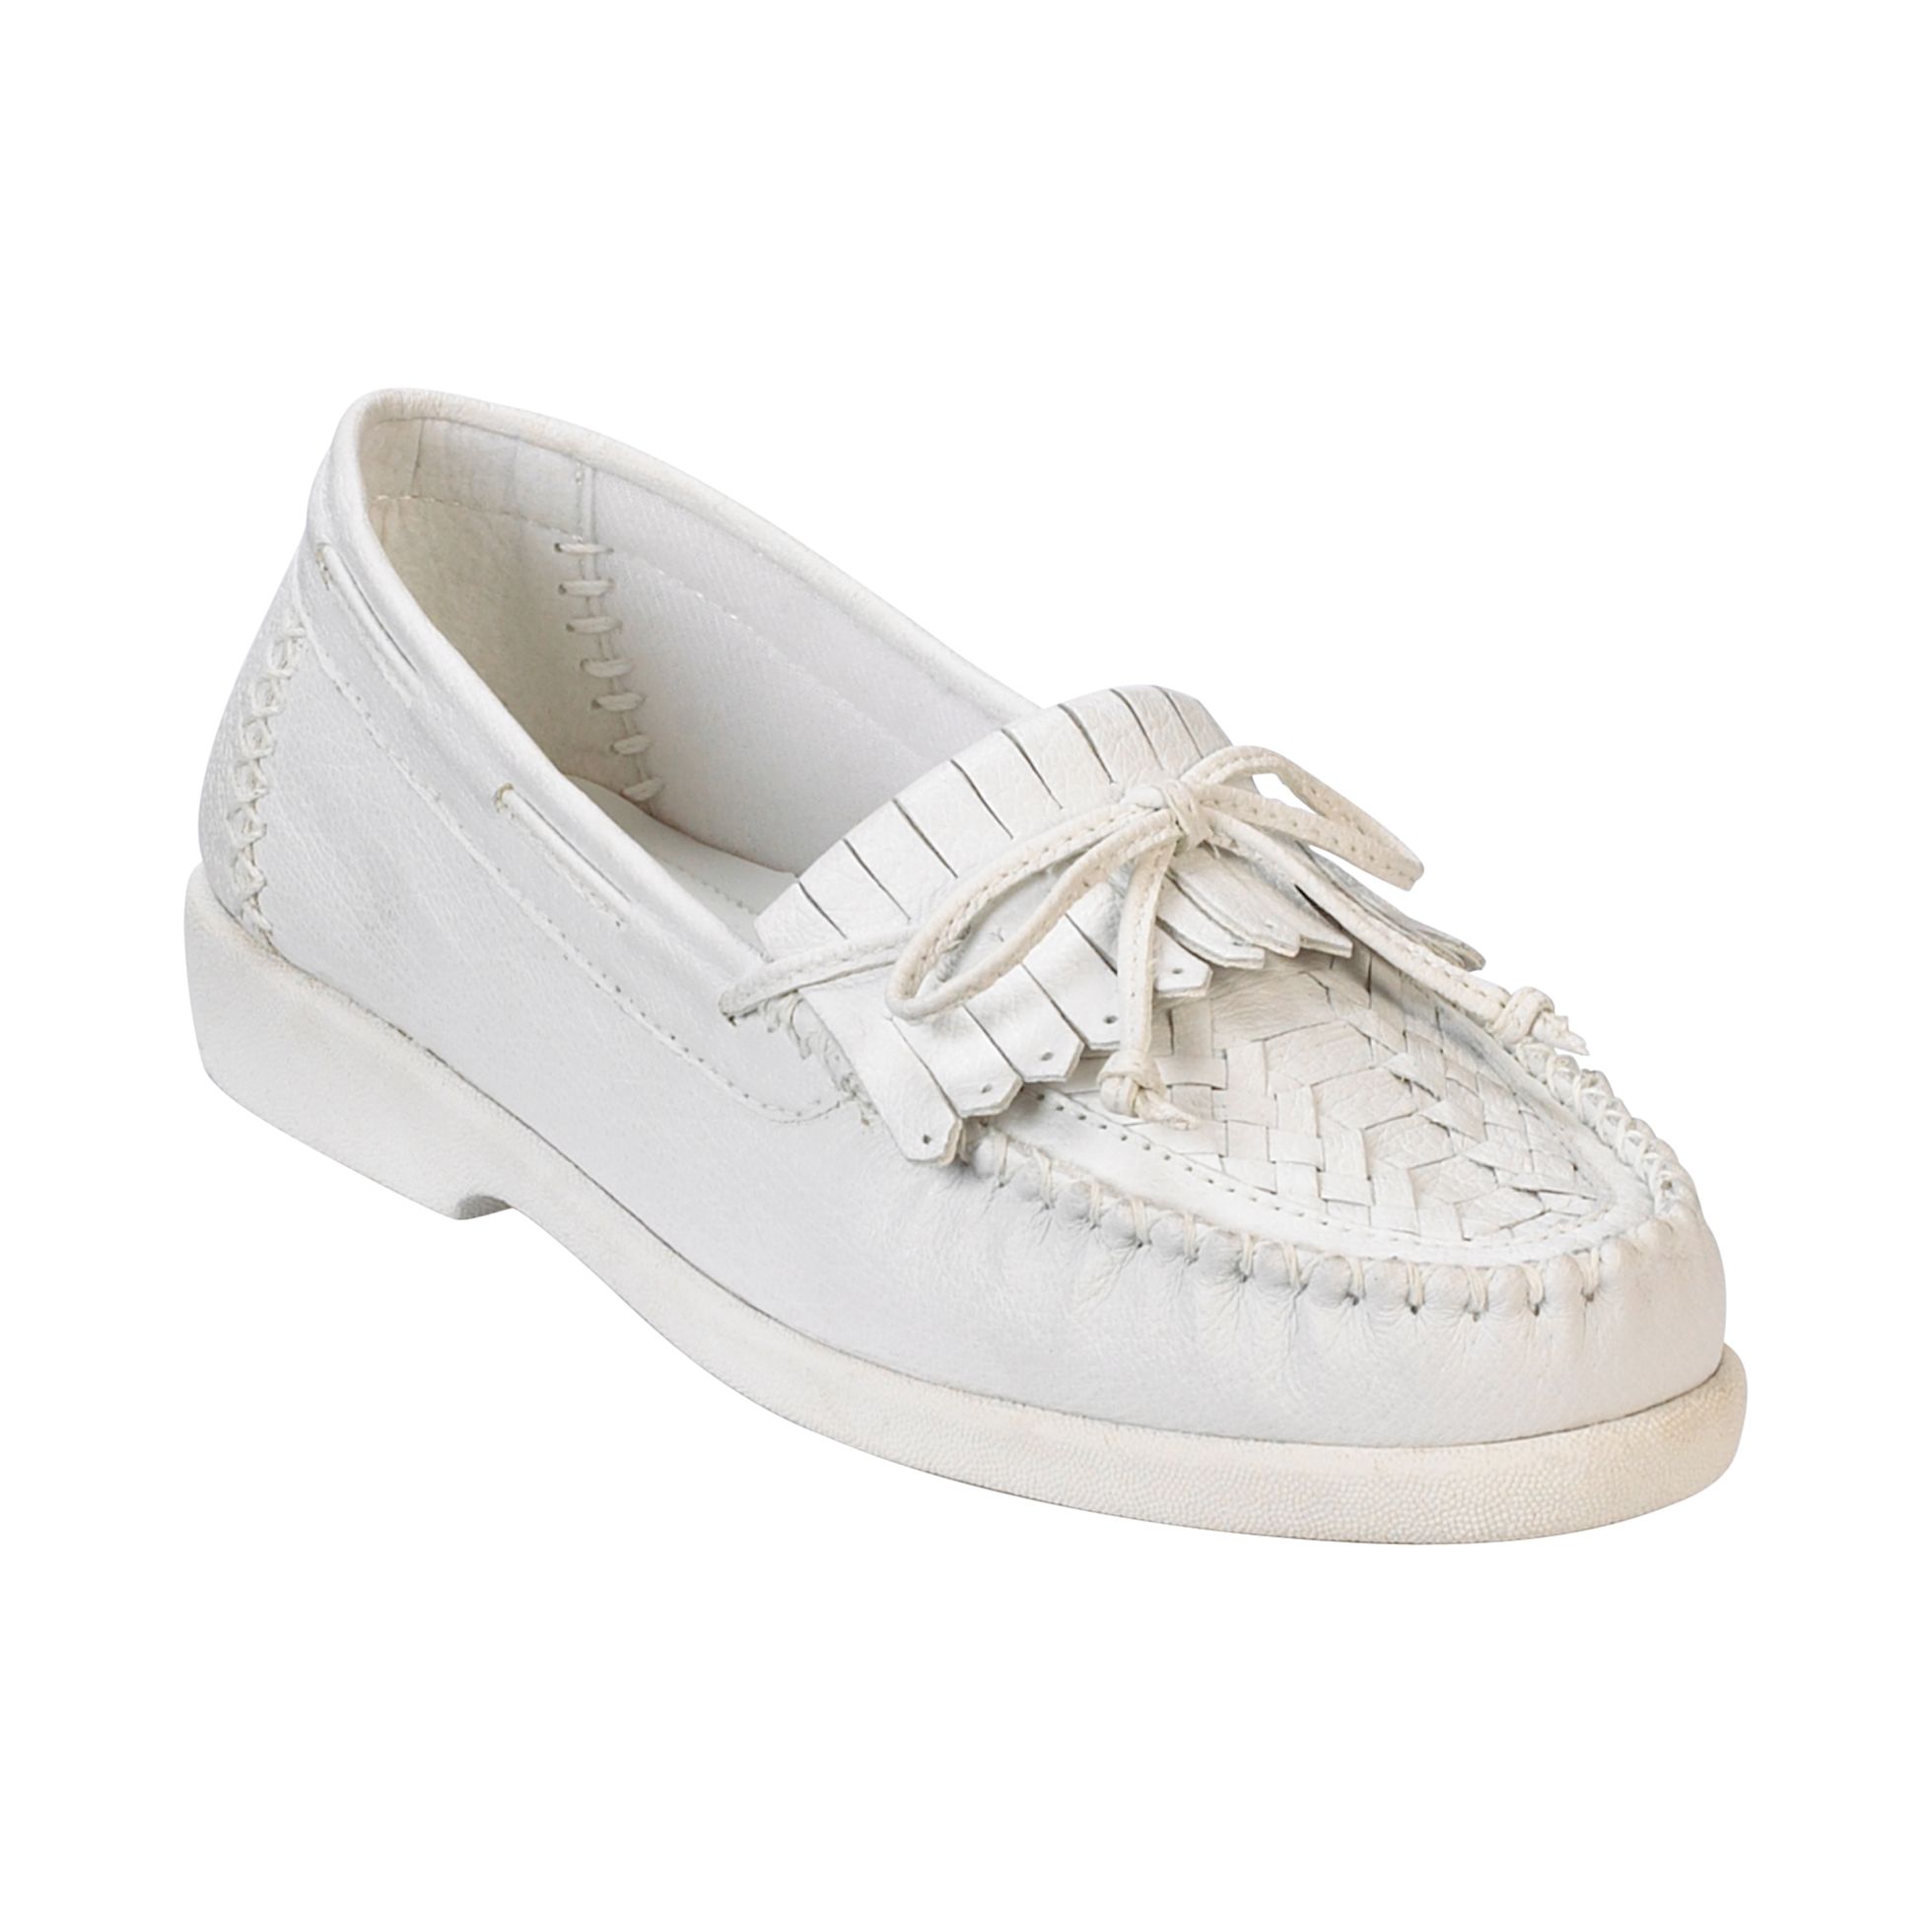 Basic Editions Women's Eloise Leather Moccasin Wide Width - White